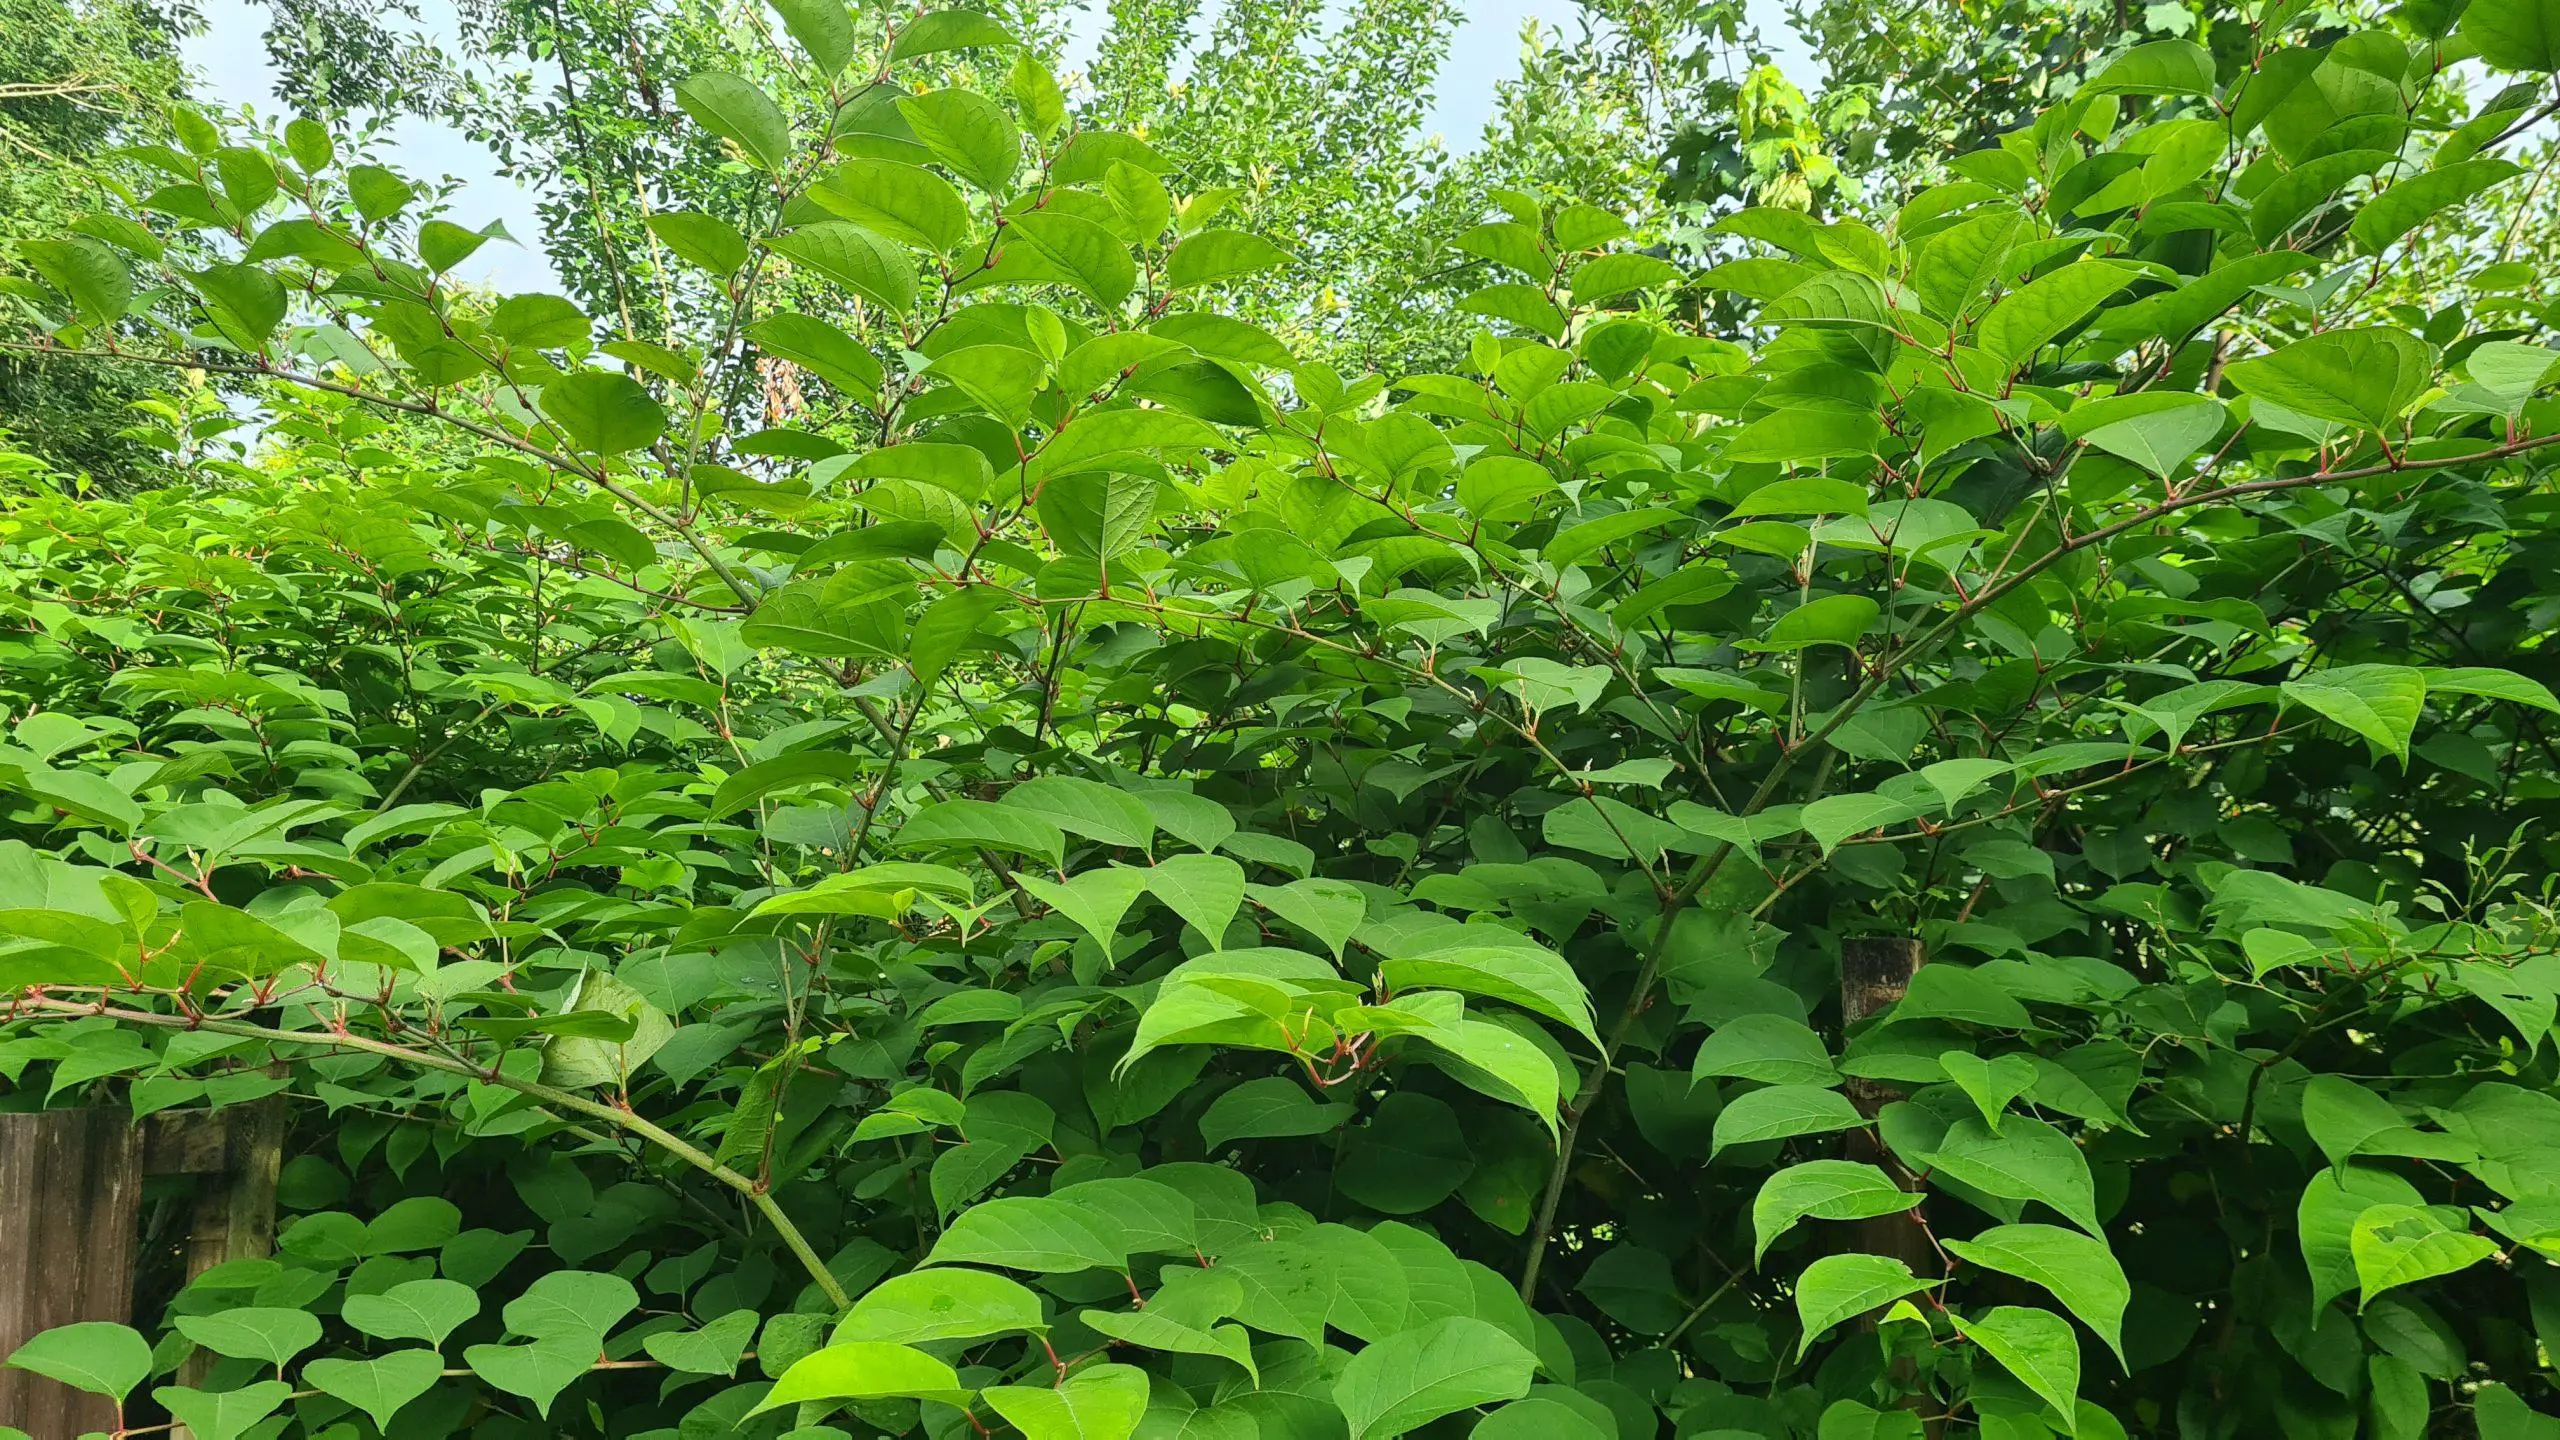 The risk of Japanese knotweed to property and the environment are enormous when you see how aggressively it grows